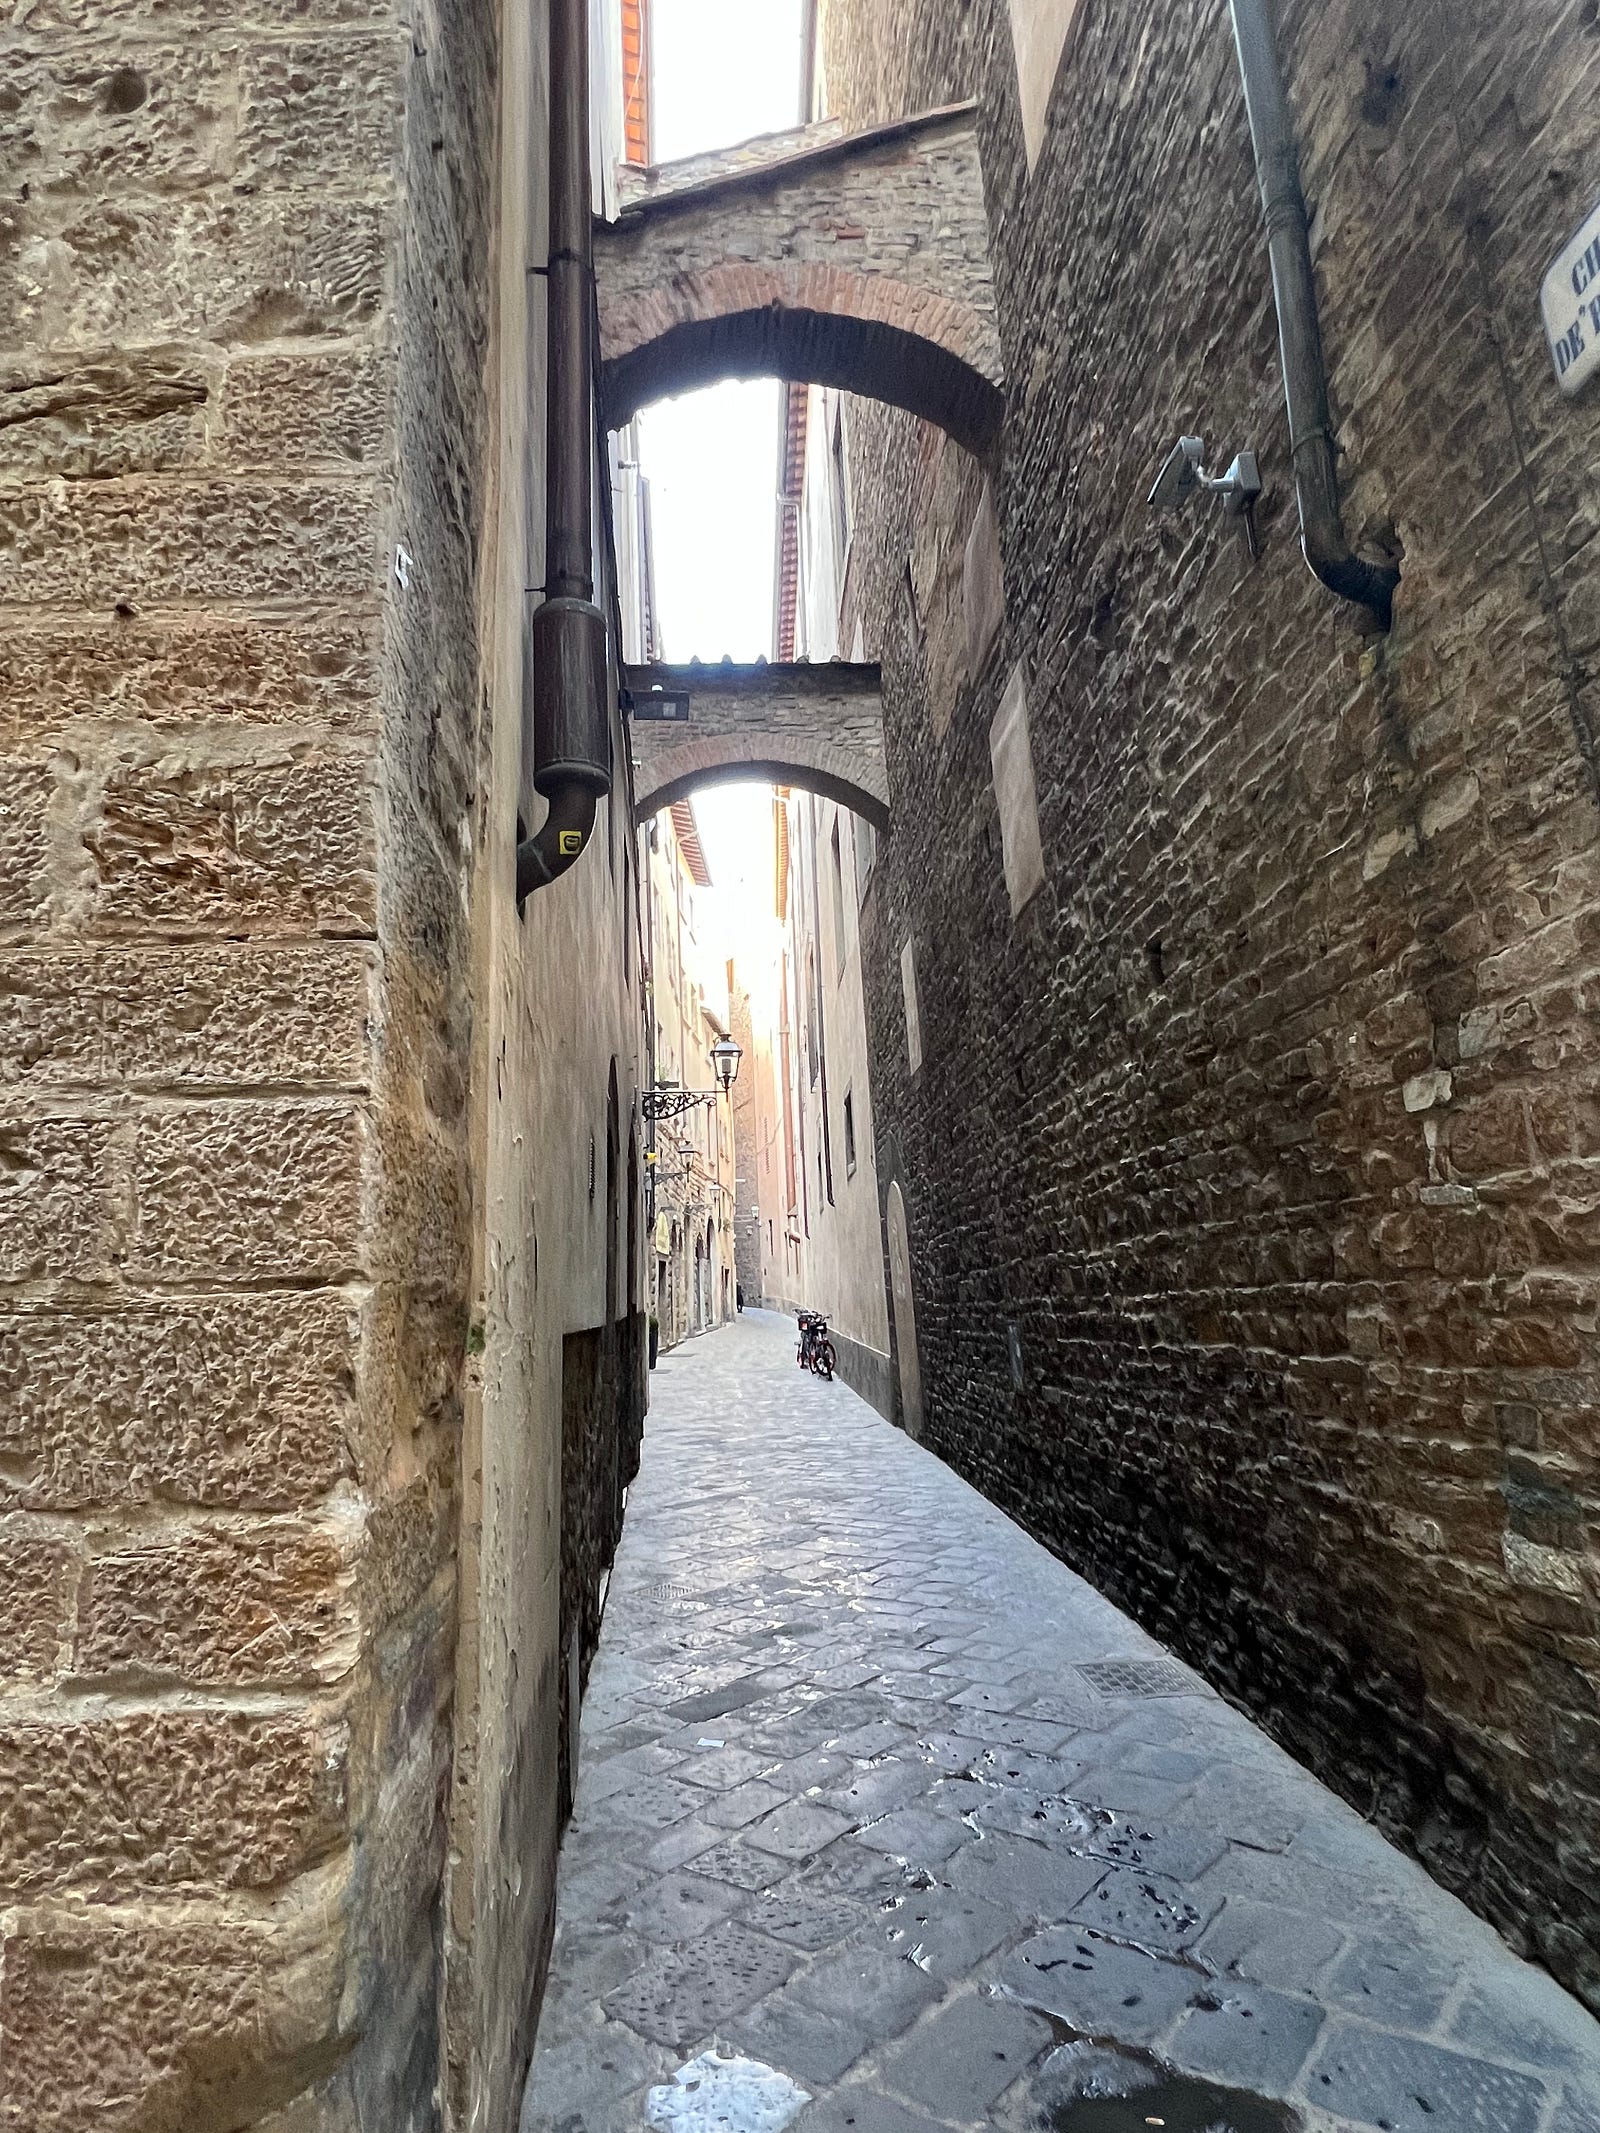 Photo of a cobbled alley near the Uffizi Gallery in Florence, Italy. The way is darkened, lit only by the reflected light of nearby stonework. Photo by Ron Steed